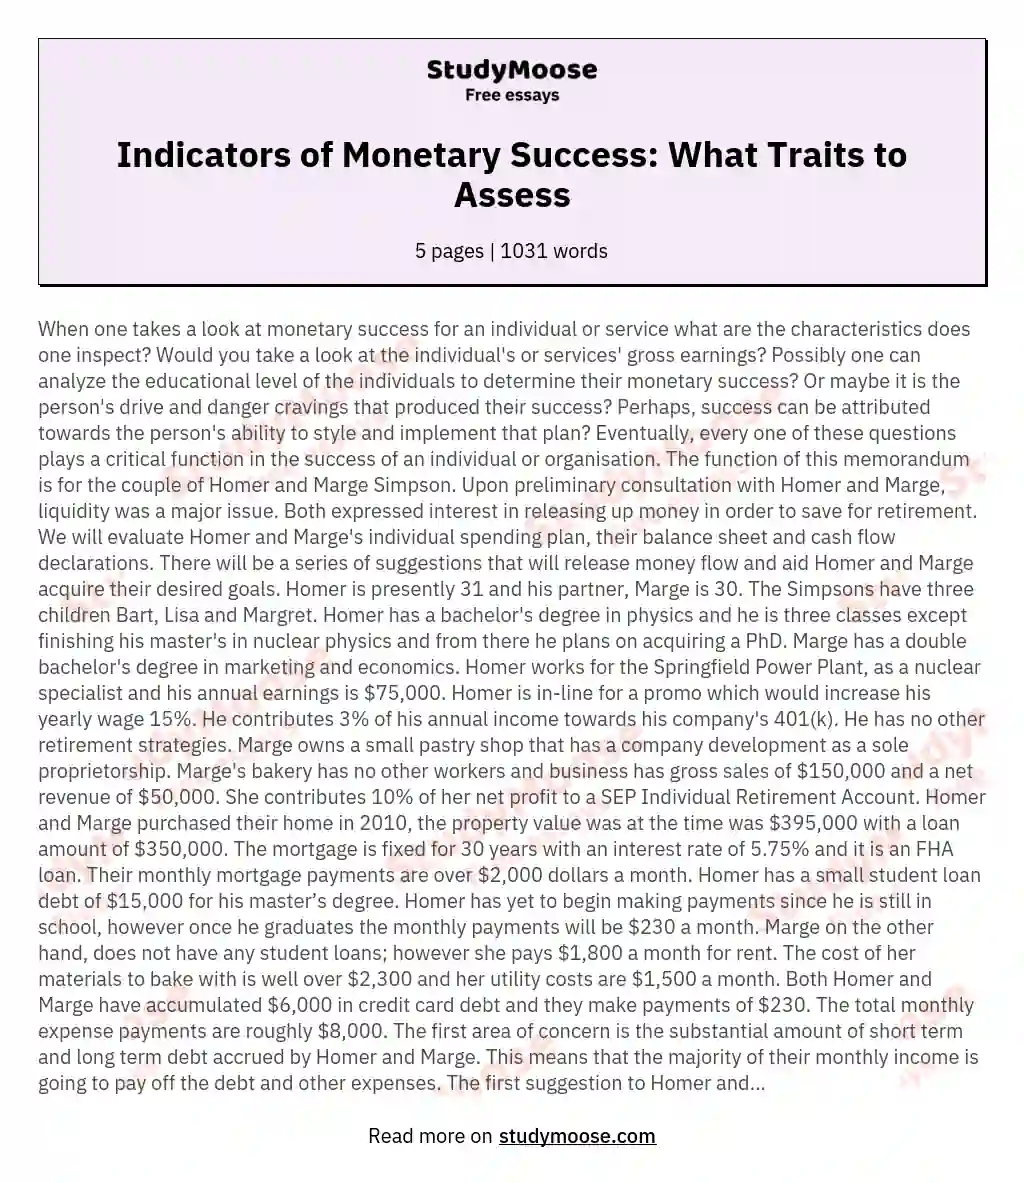 Indicators of Monetary Success: What Traits to Assess essay